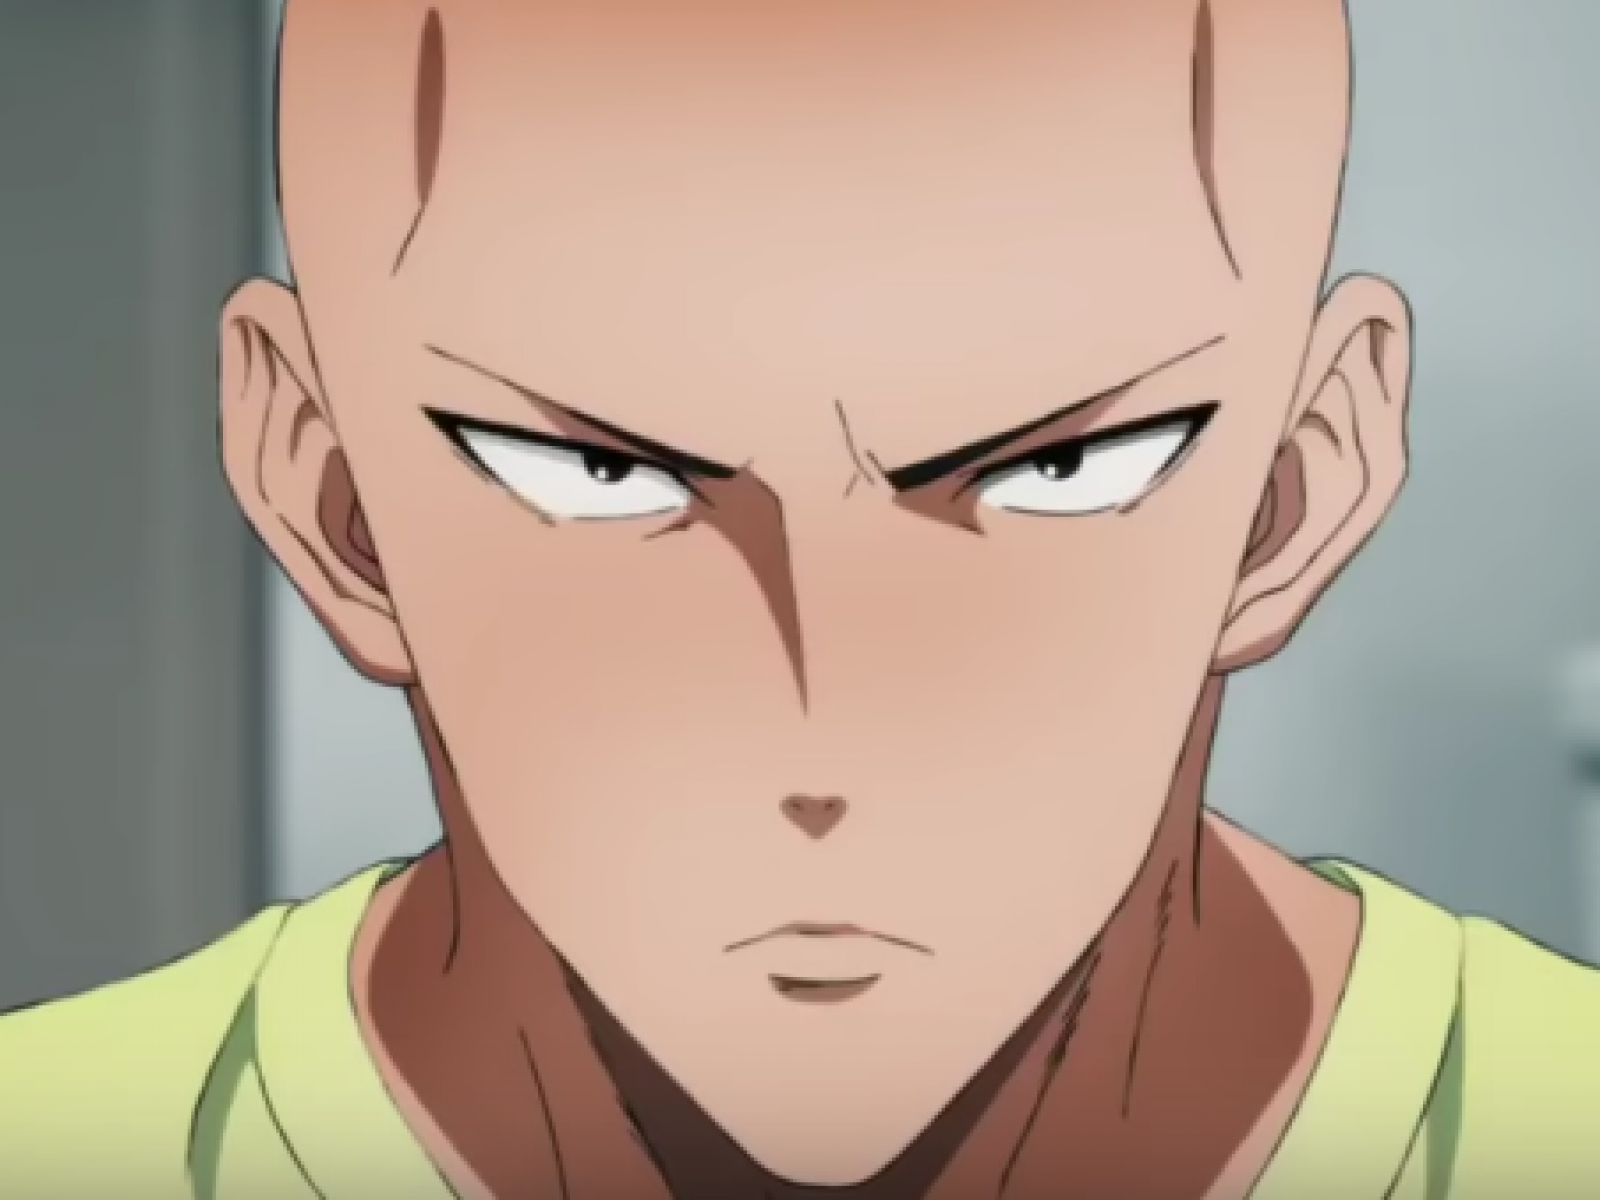 One Punch Man - Season 2 Official Trailer 